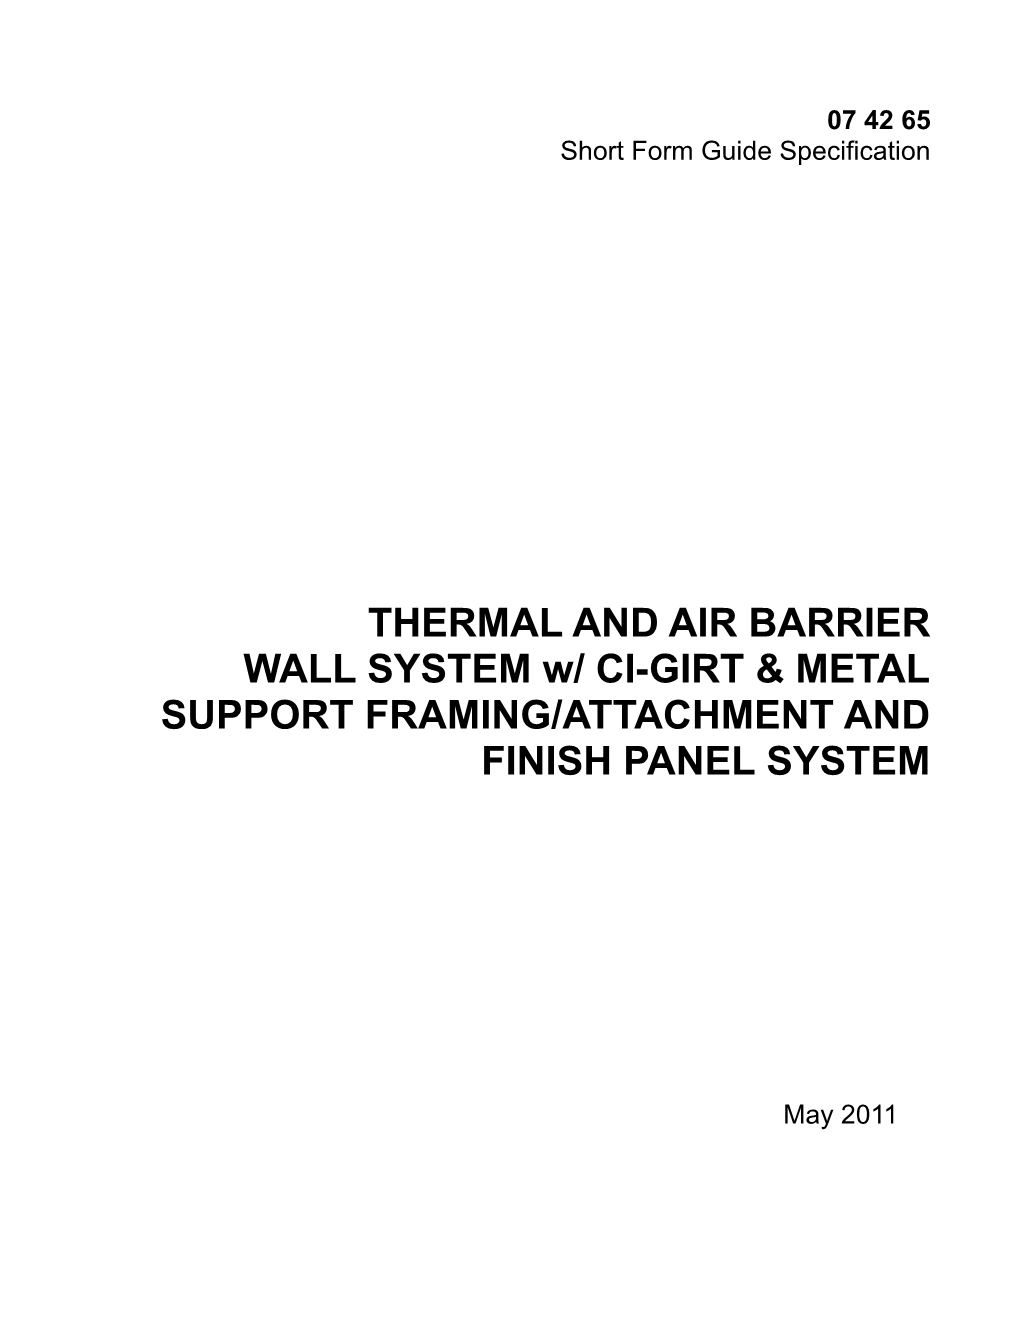 Thermal and Air Barrier